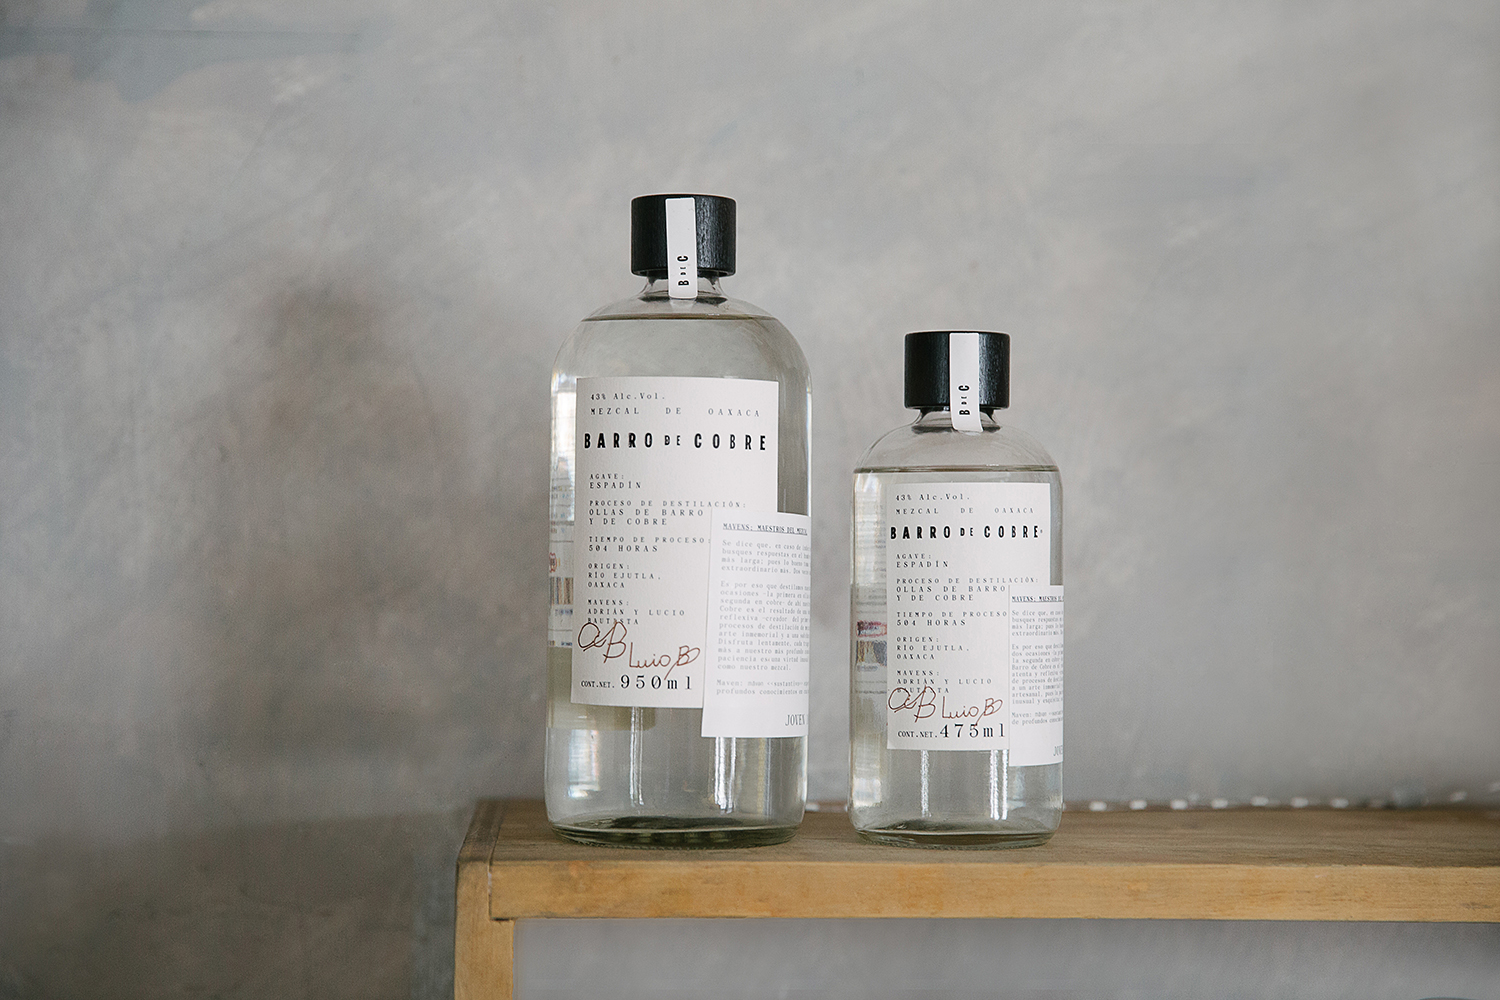 Branding and packaging by Mexican design studio Savvy for twice distilled mezcal Barro de Cobre